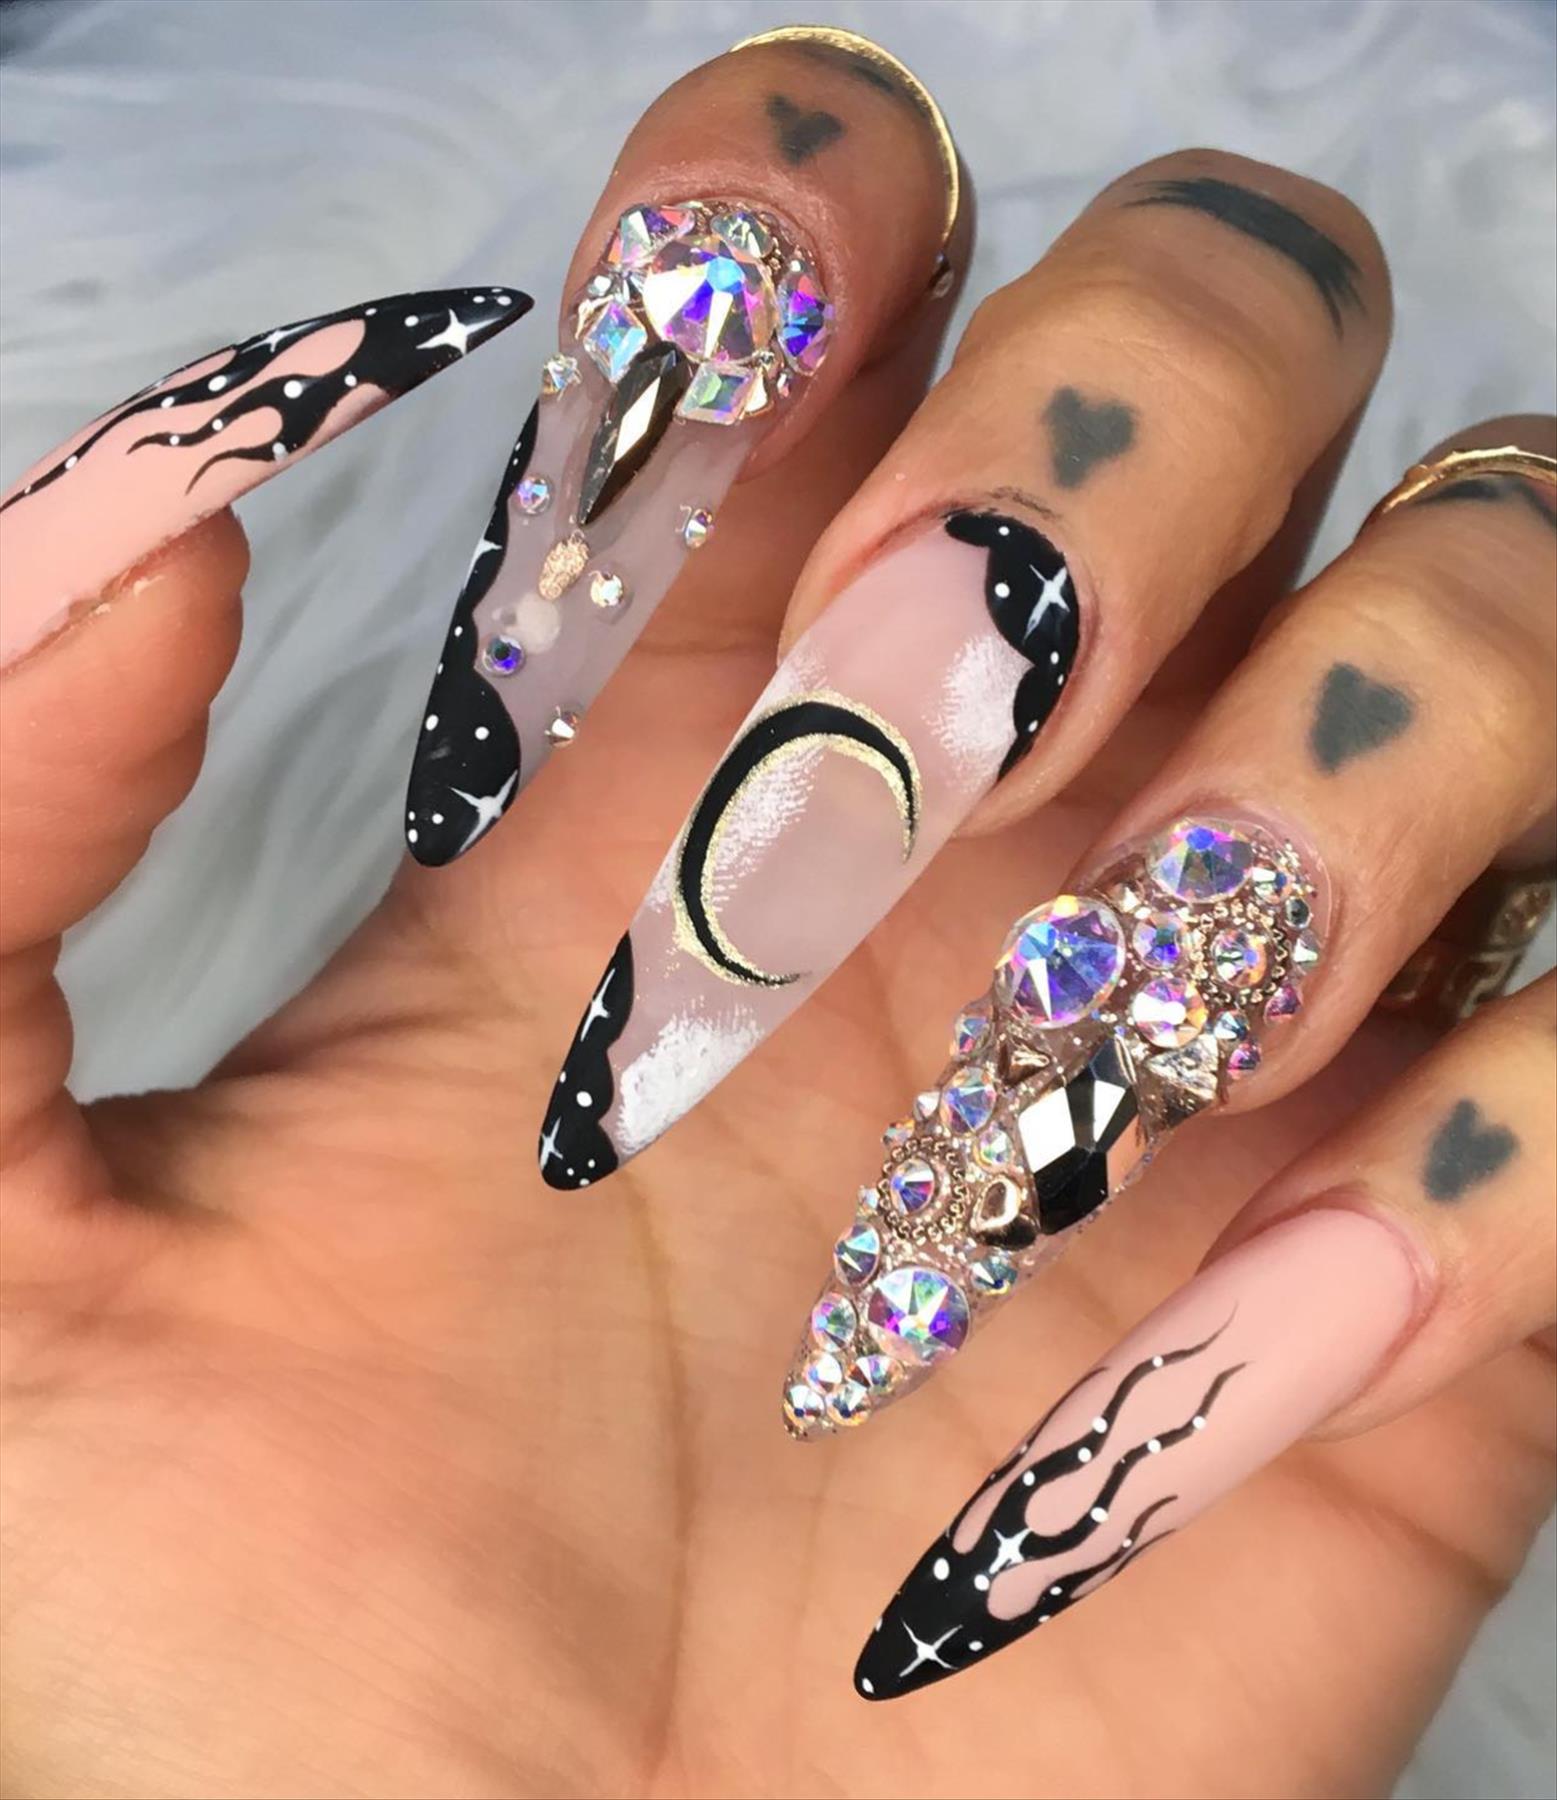 Edgy grunge acrylic nail ideas with black manicures